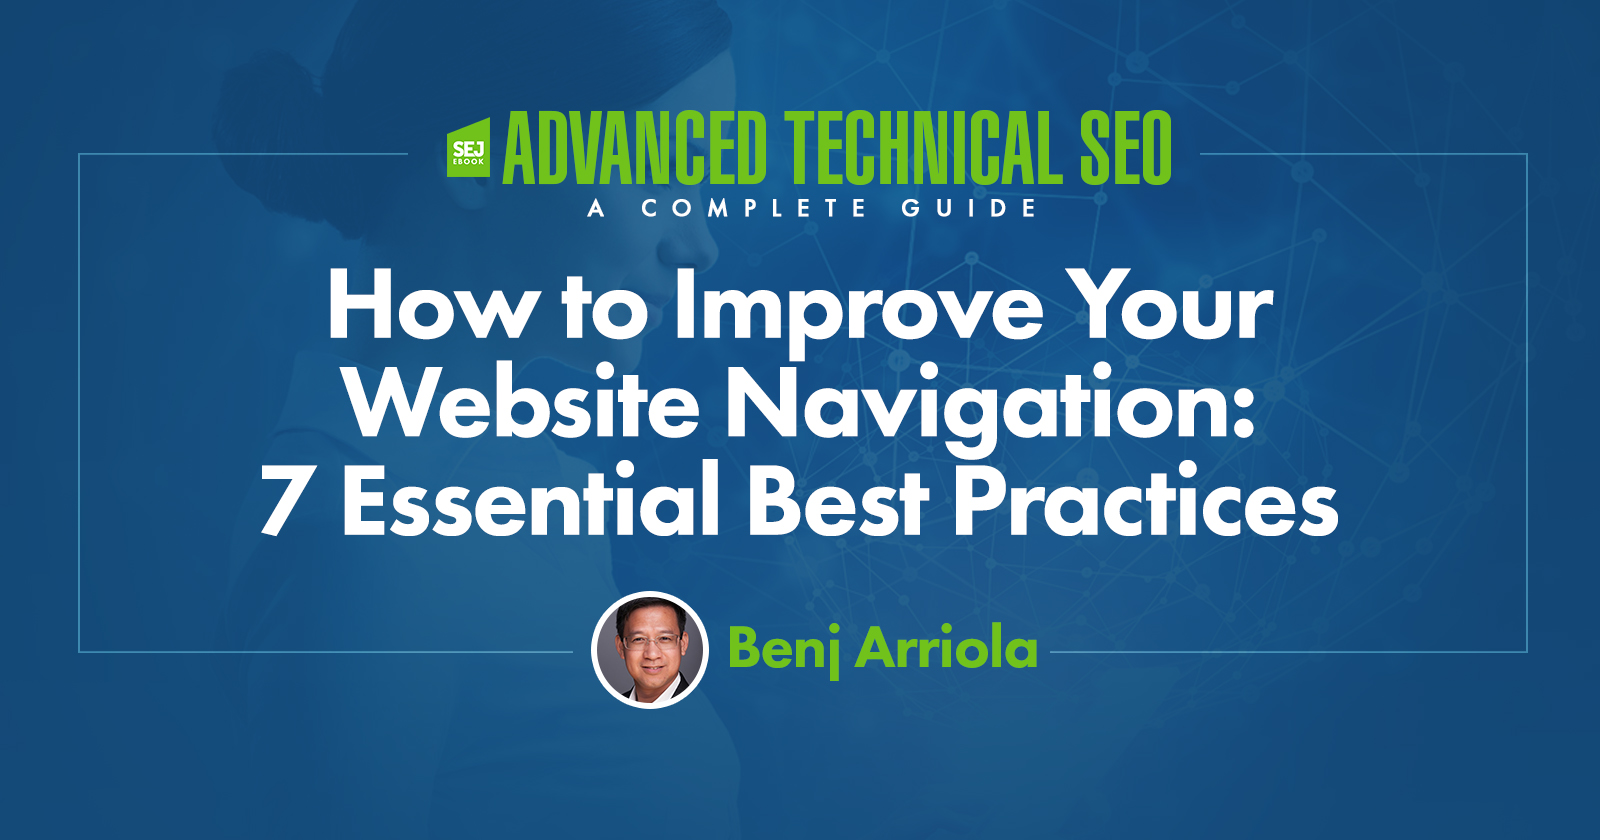 How to Improve Your Website Navigation - 7 Essential Best Practices